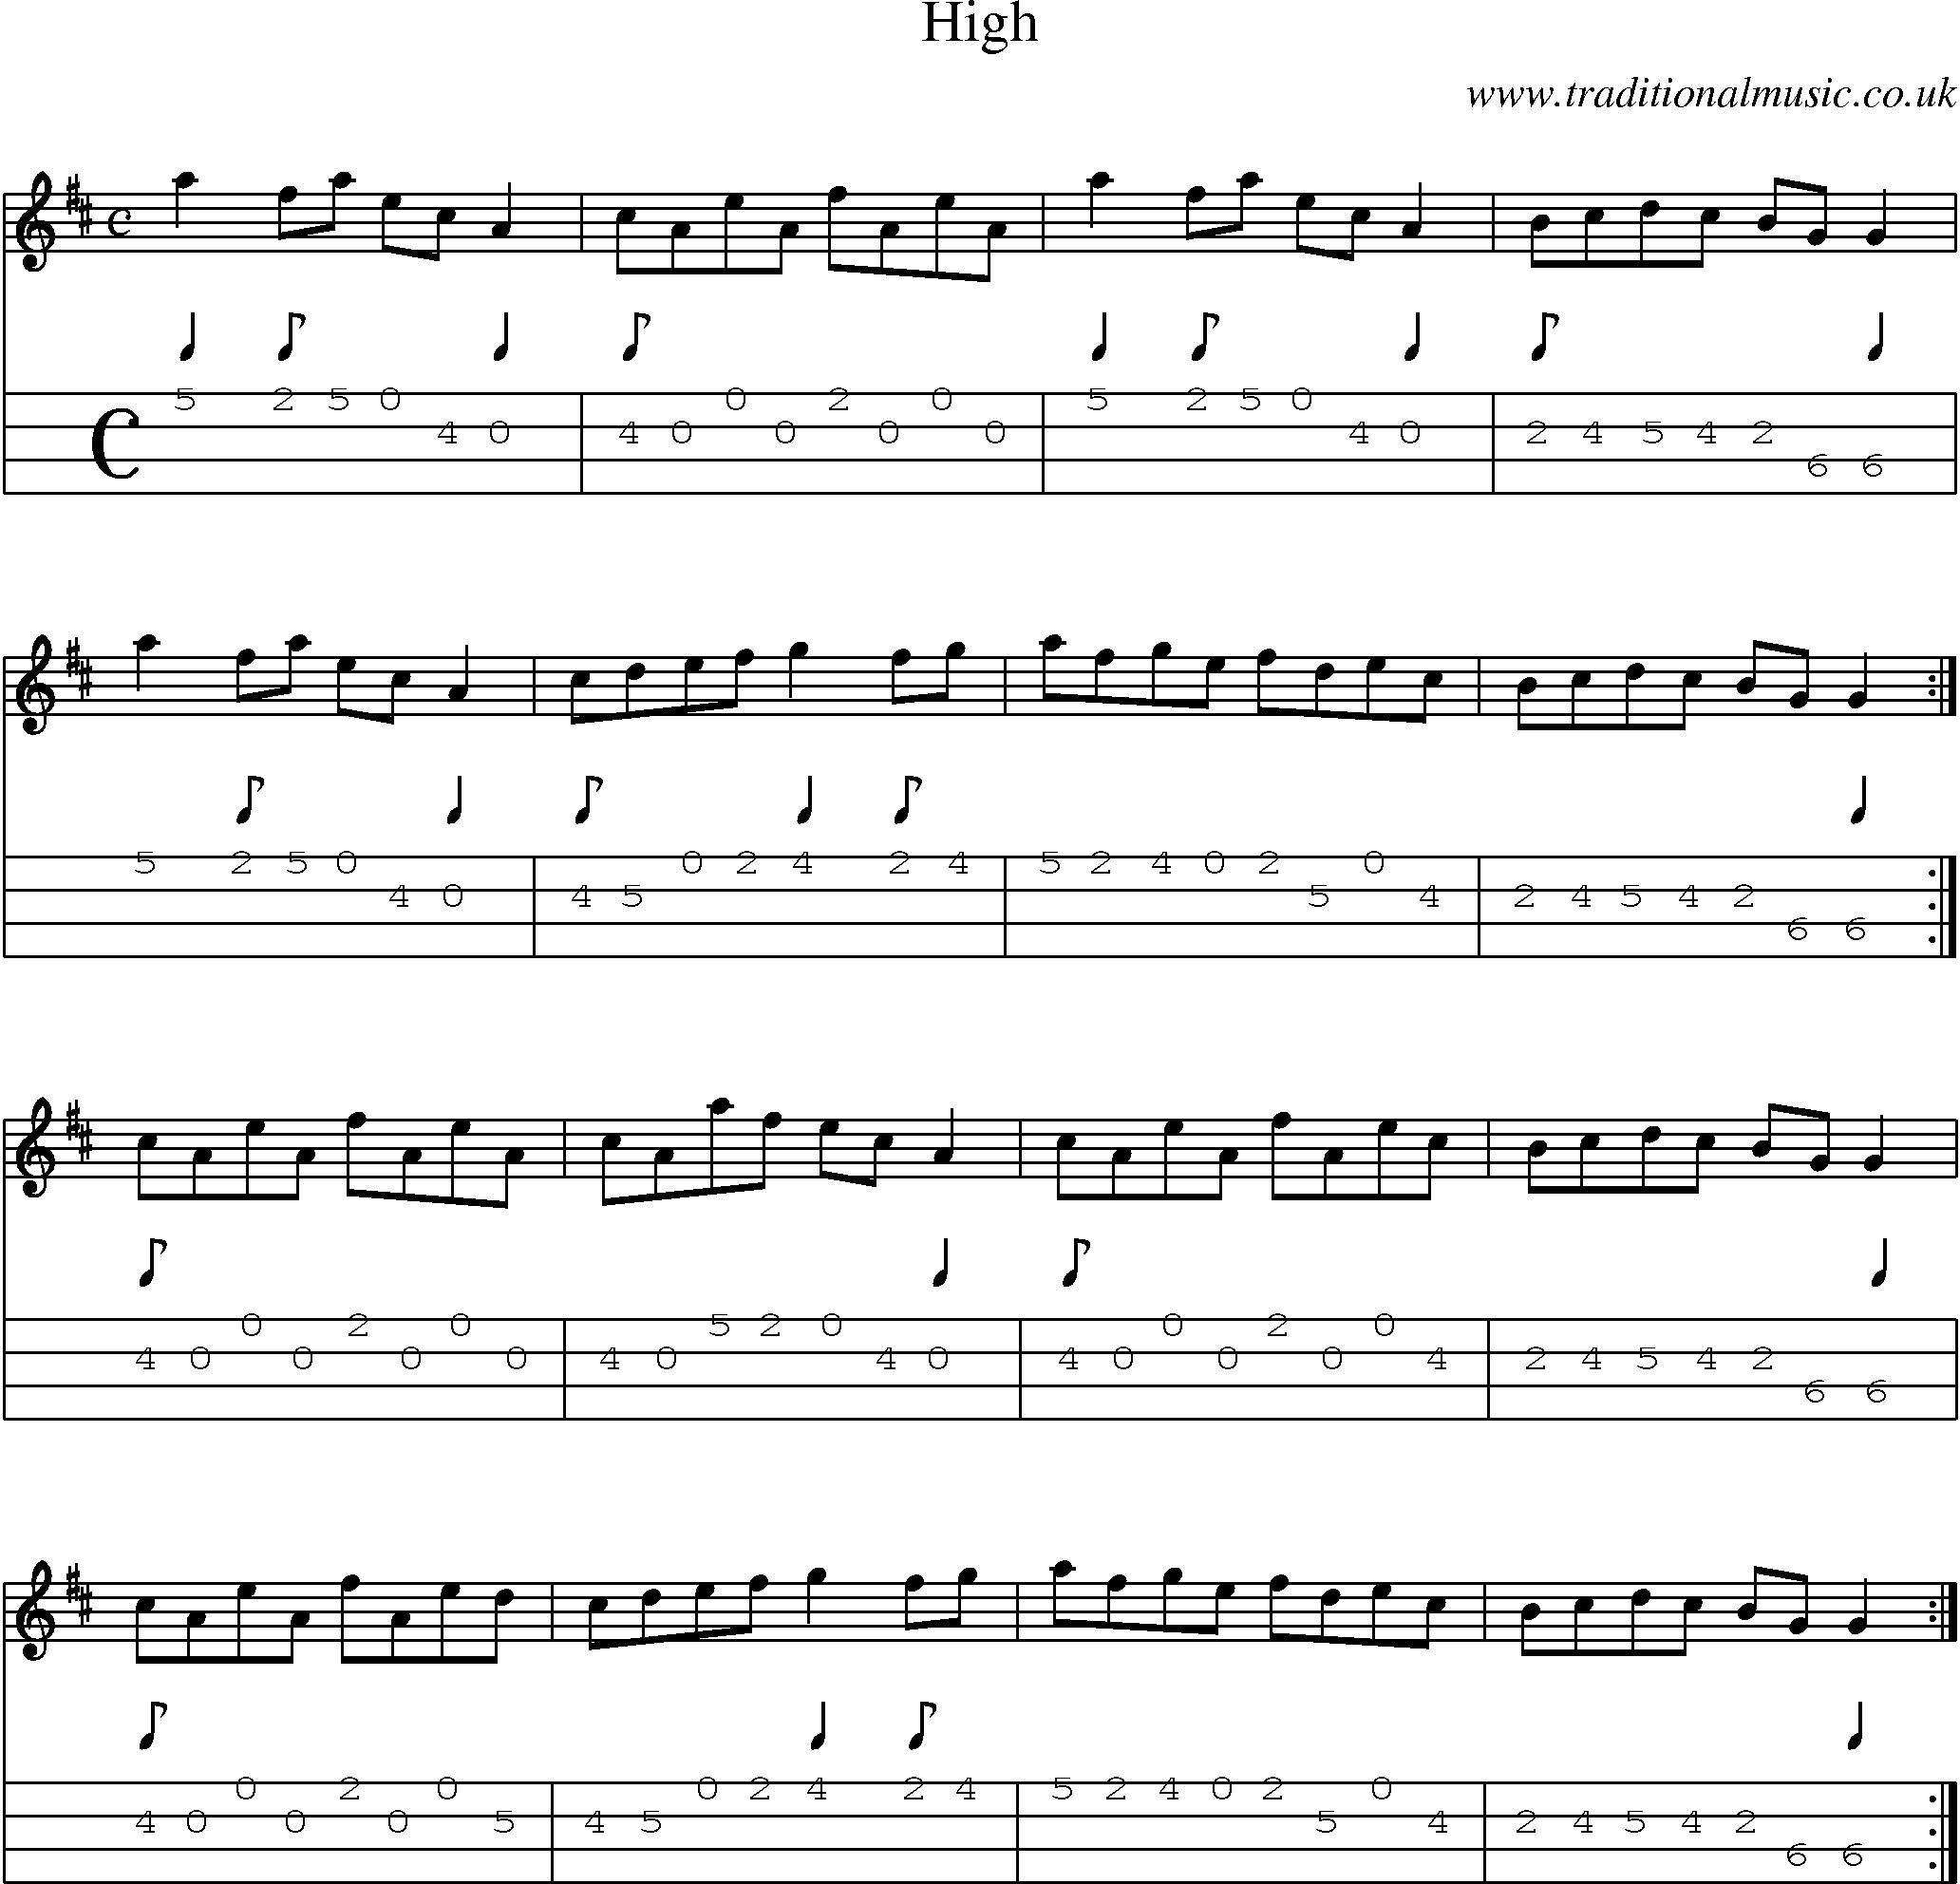 Music Score and Mandolin Tabs for High